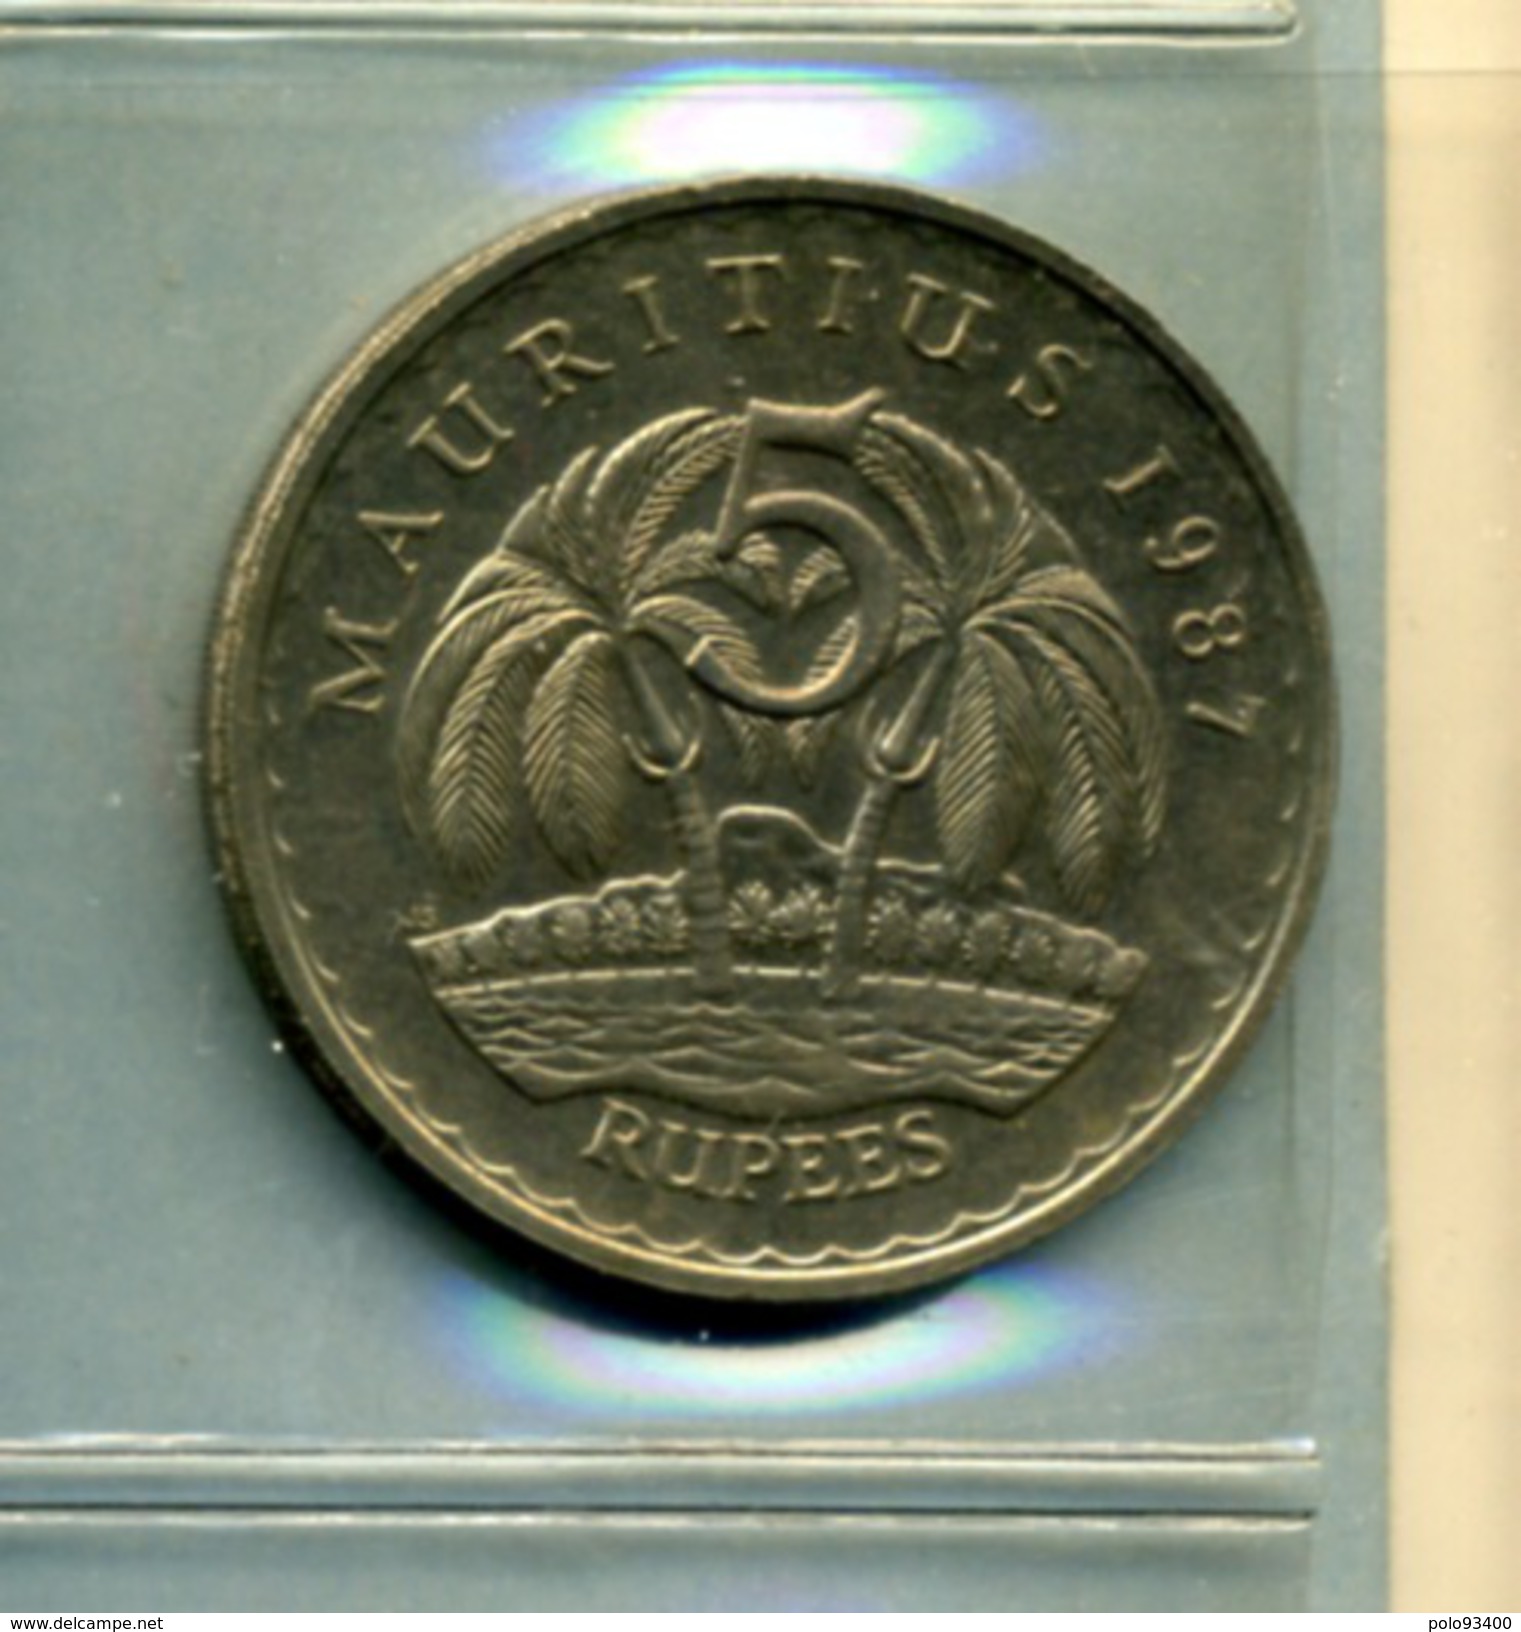 1987 5 RUPEES - Maurice